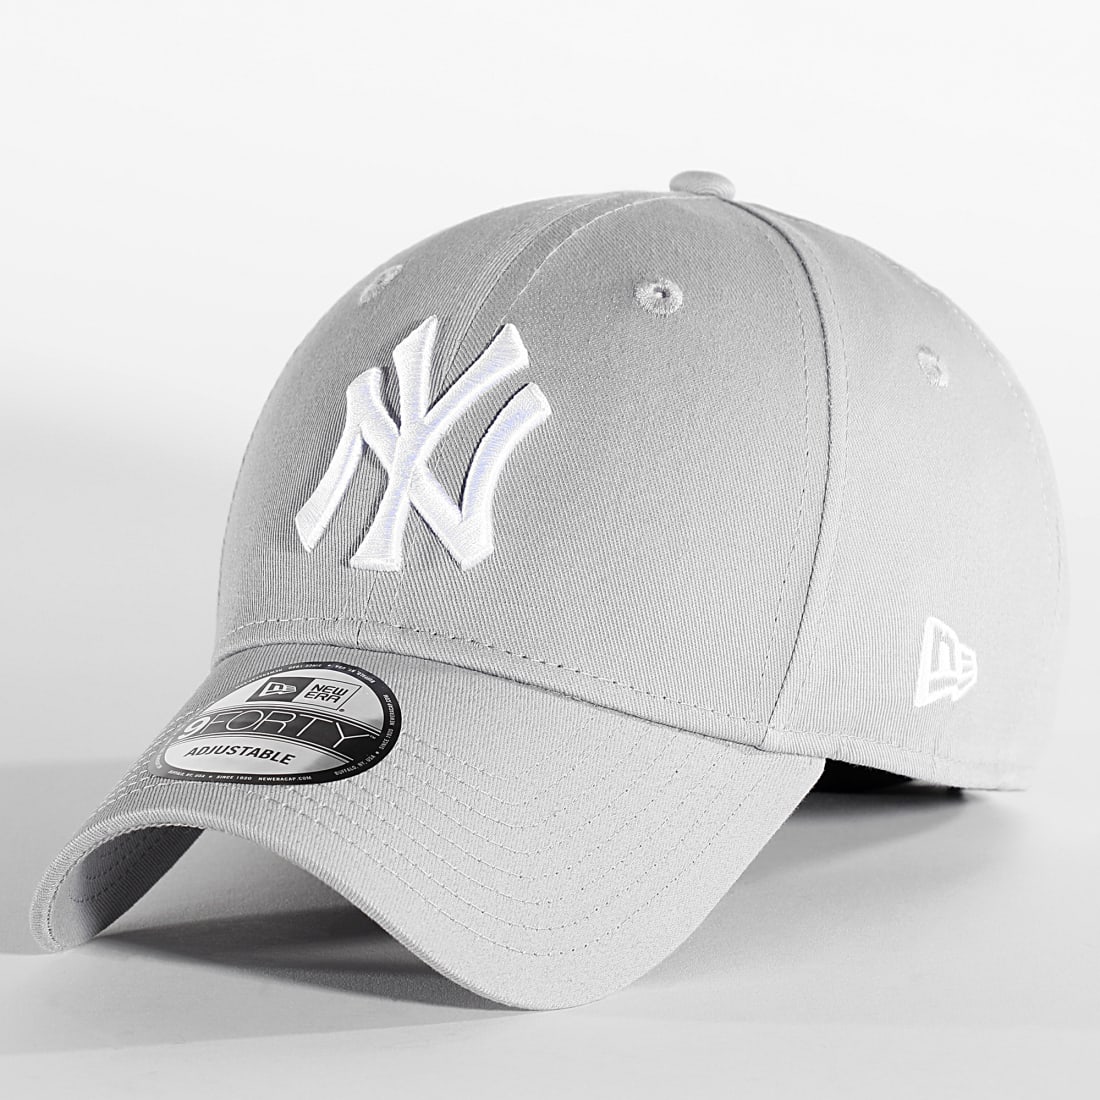 Casquettes - New Era New York Yankees 9FORTY (gris)